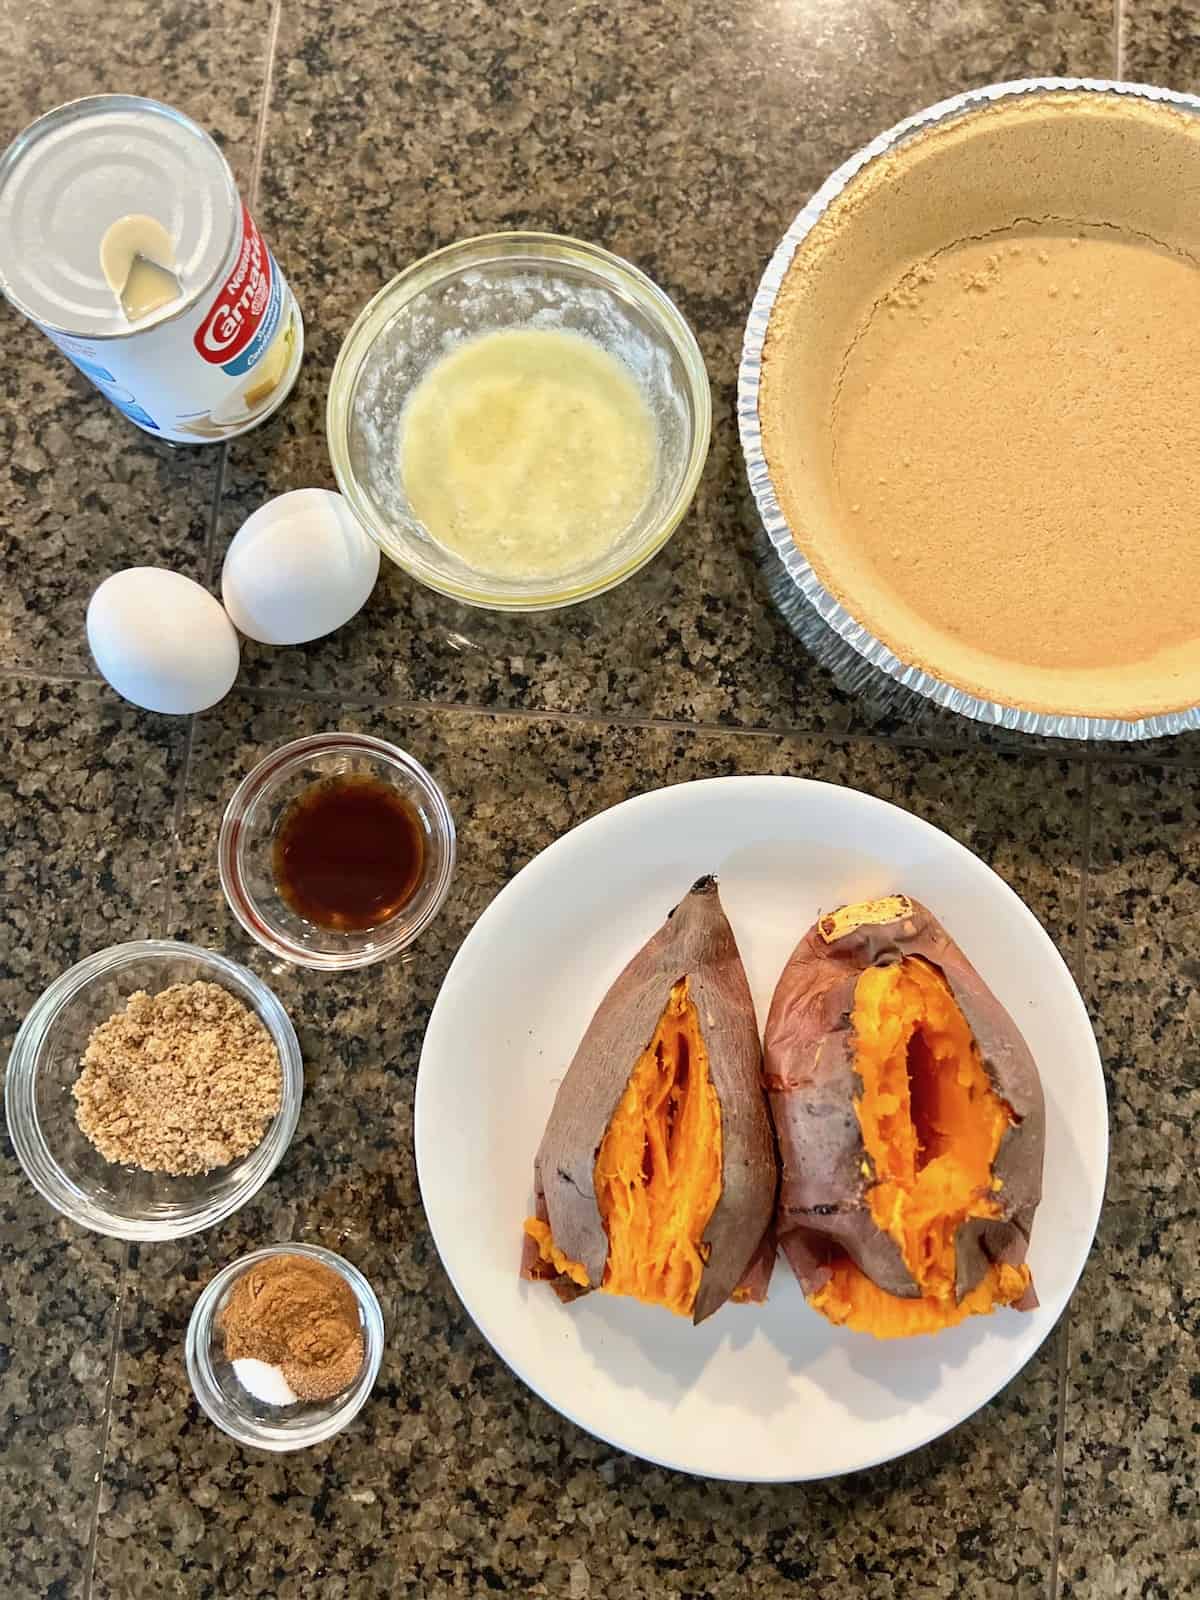 Pie Baked sweet potatoes next to other ingredients on a counter.